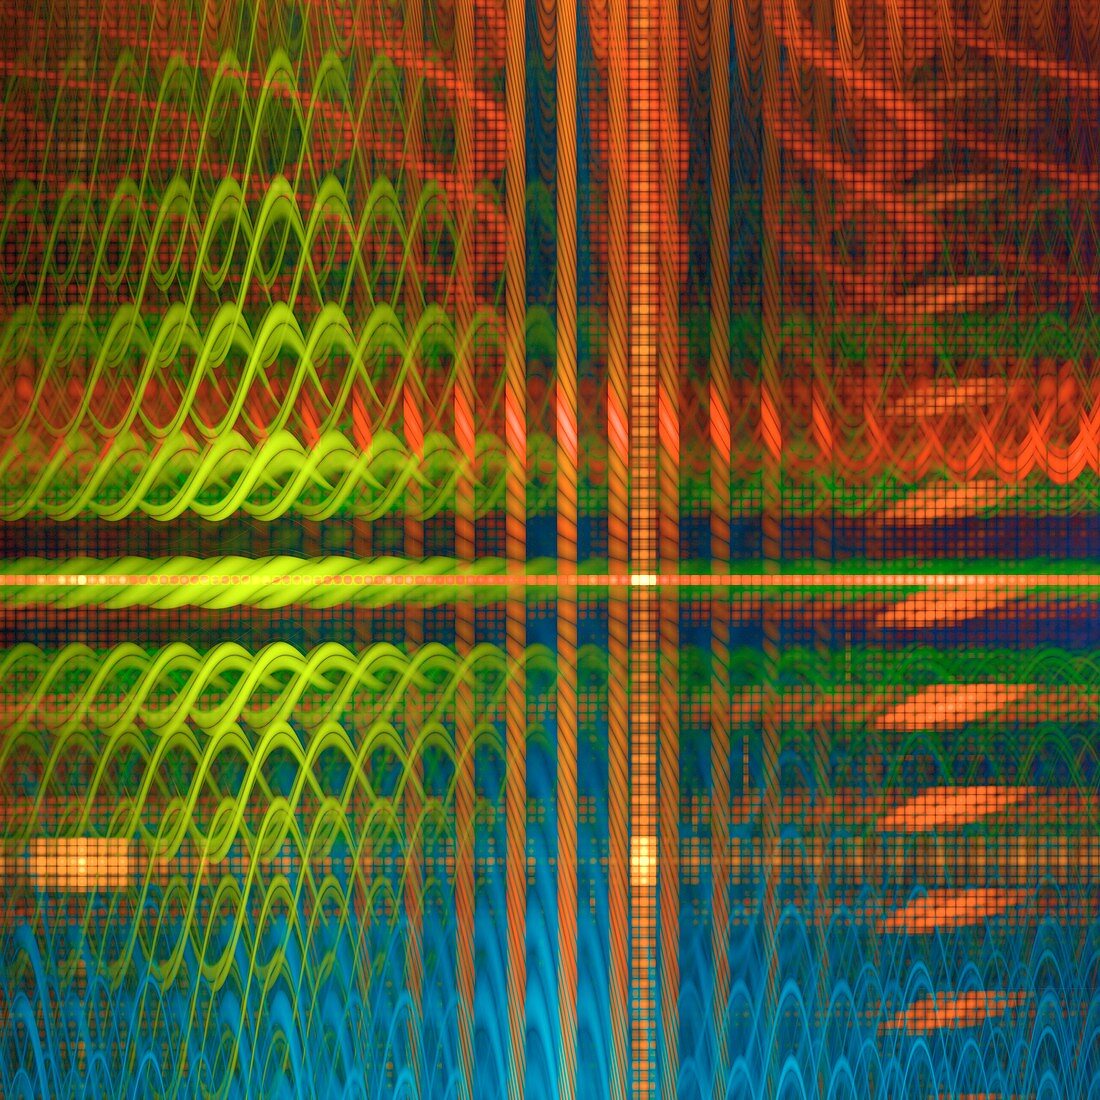 Data interference abstract illustration.